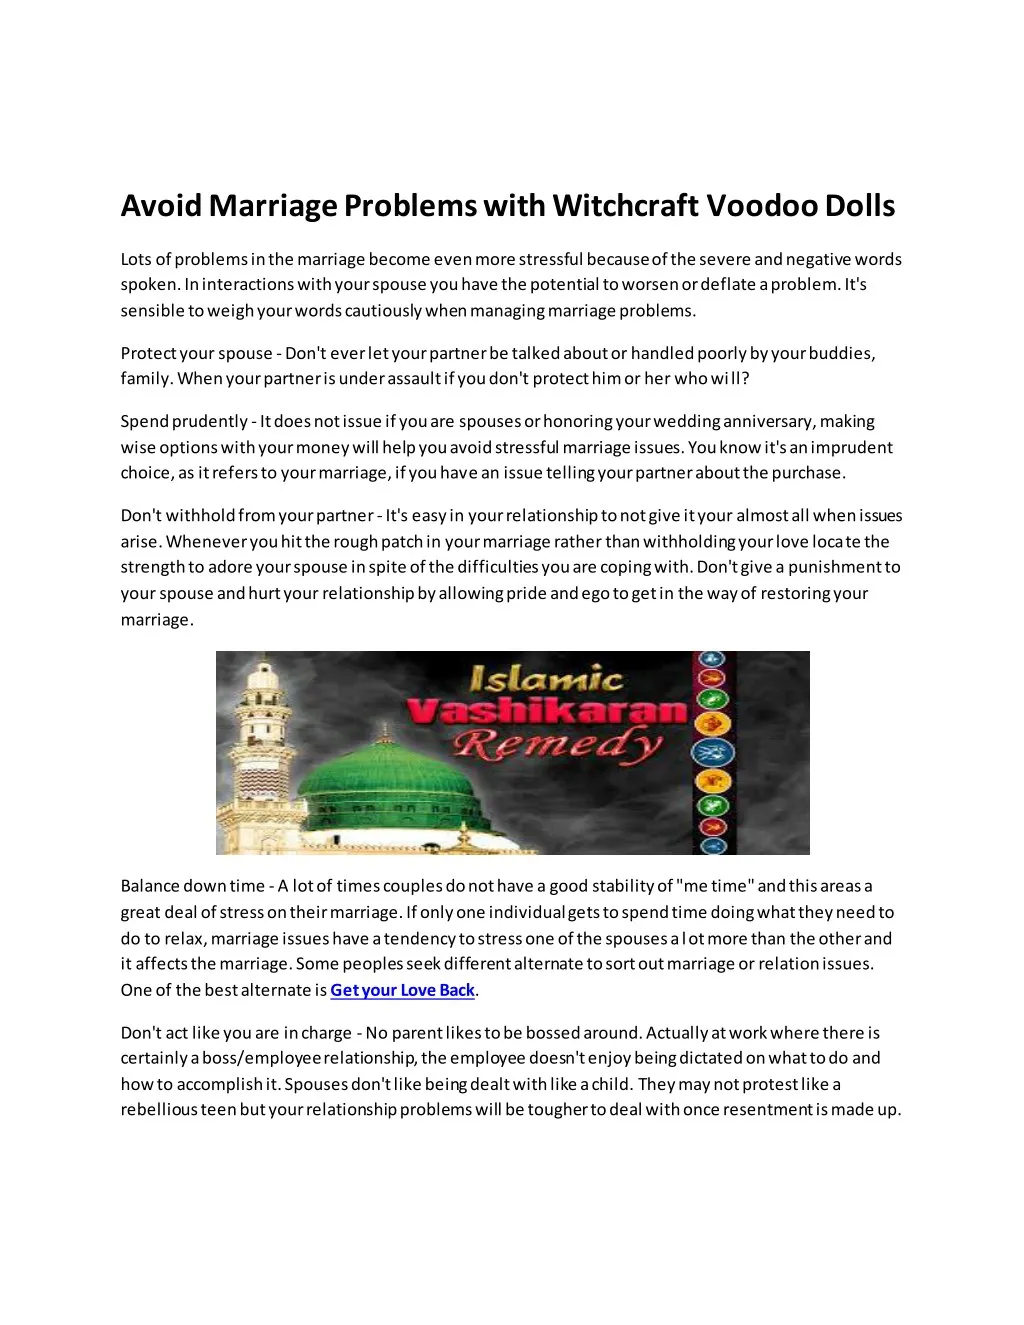 avoid marriage problems with witchcraft voodoo